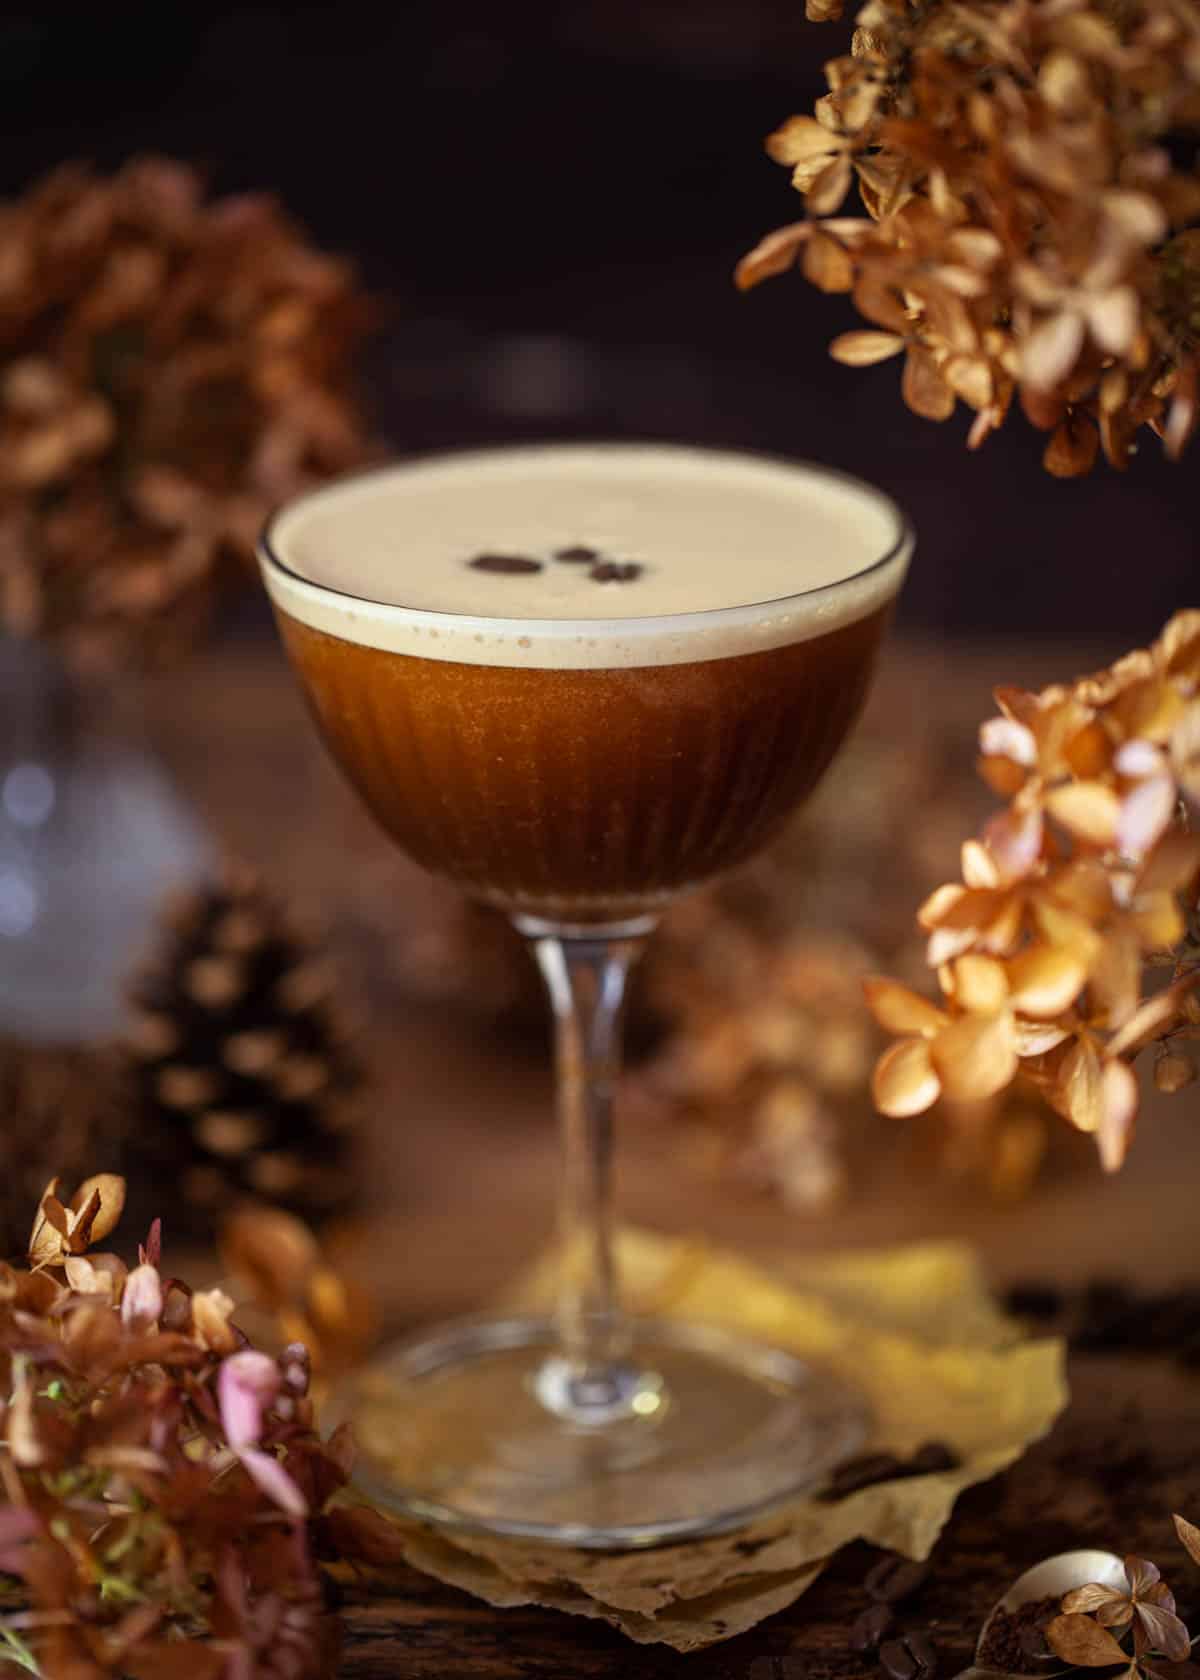 A coffee martini Ancho Reyes Cocktail garnished with coffee beans